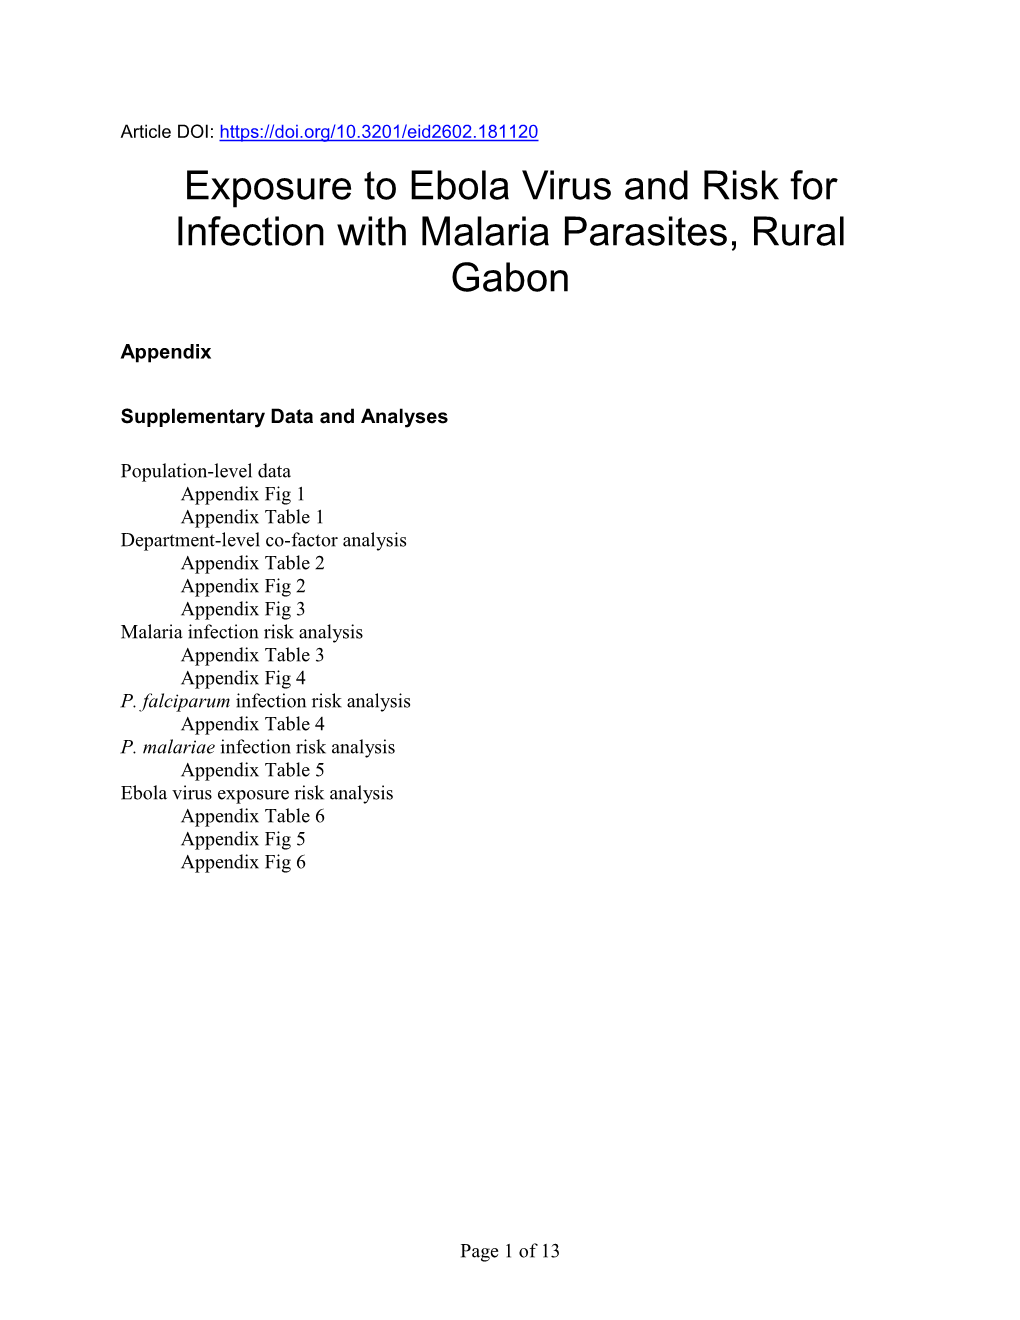 Exposure to Ebola Virus and Risk for Infection with Malaria Parasites, Rural Gabon